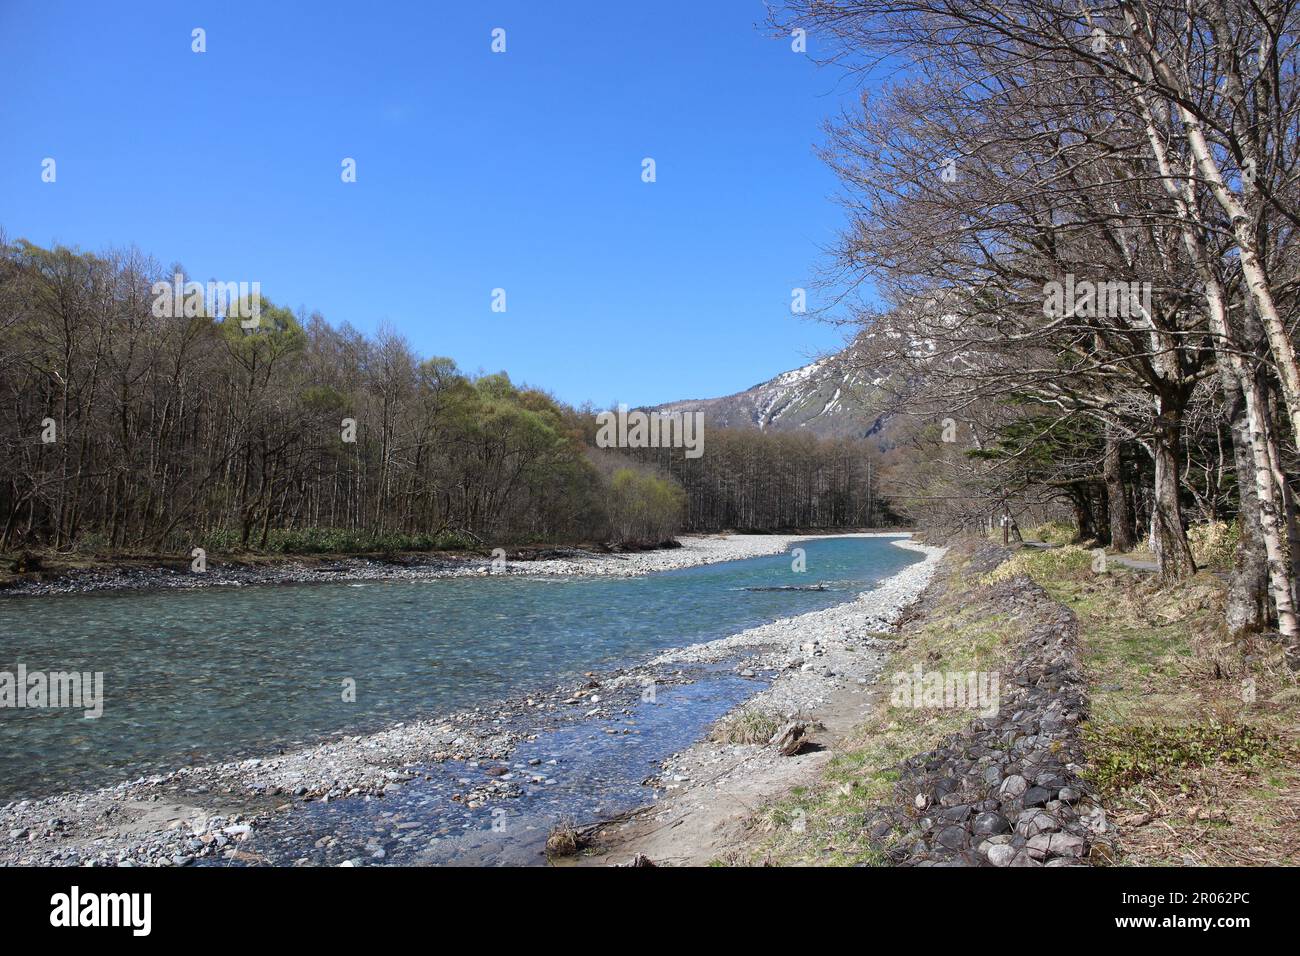 The clear Azusa River in Kamikochi, Japan Stock Photo